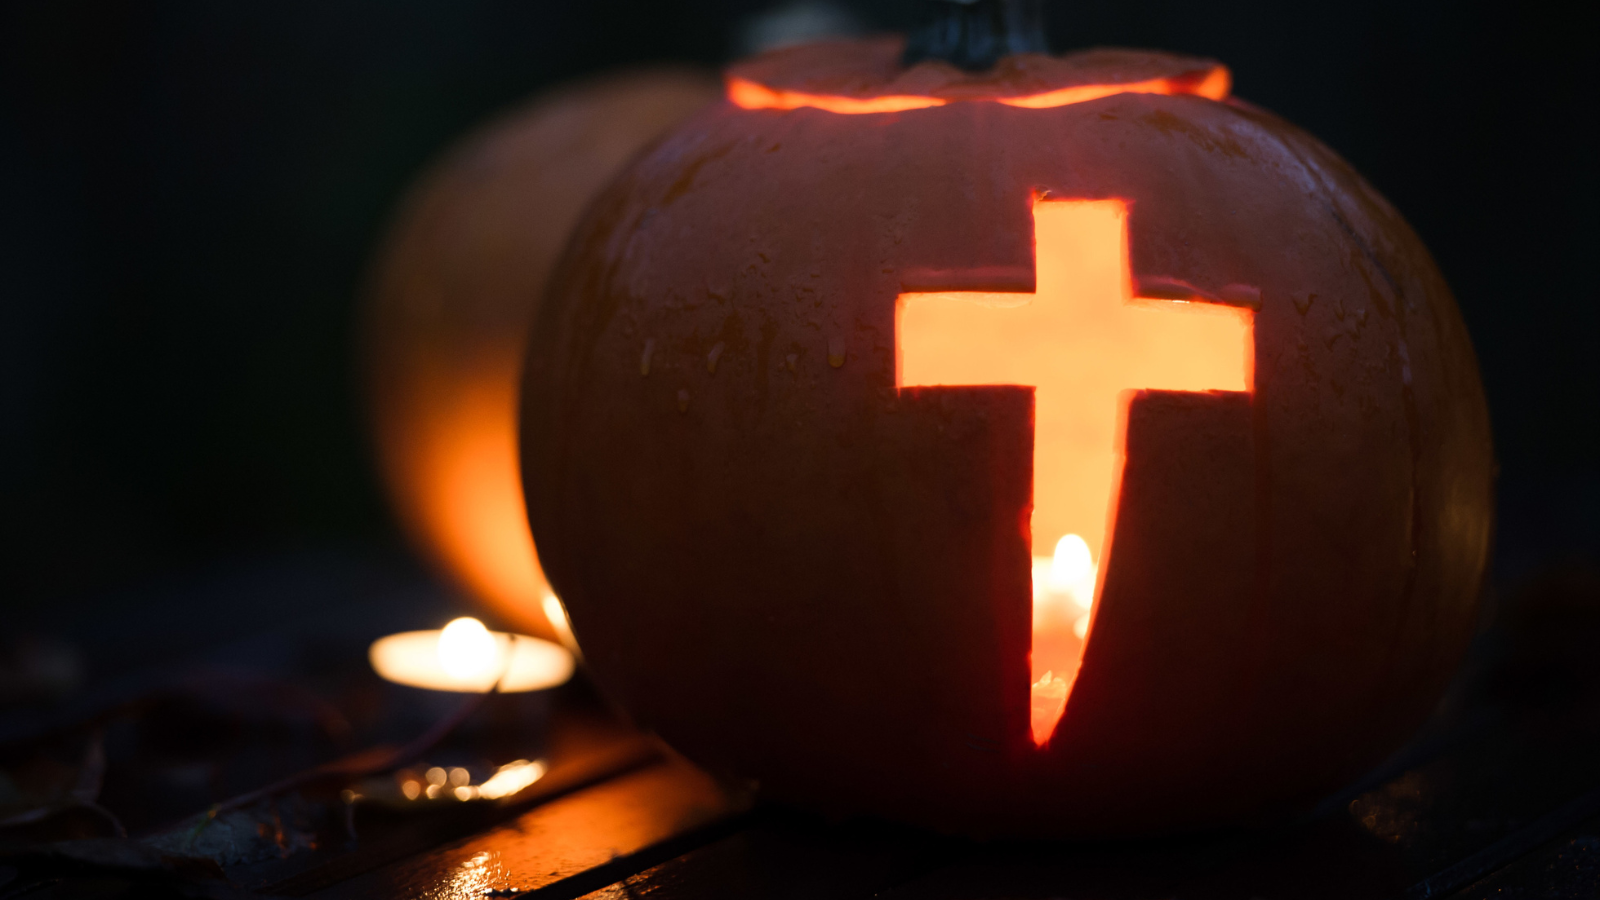 A pumpkin with a cross carved into it.